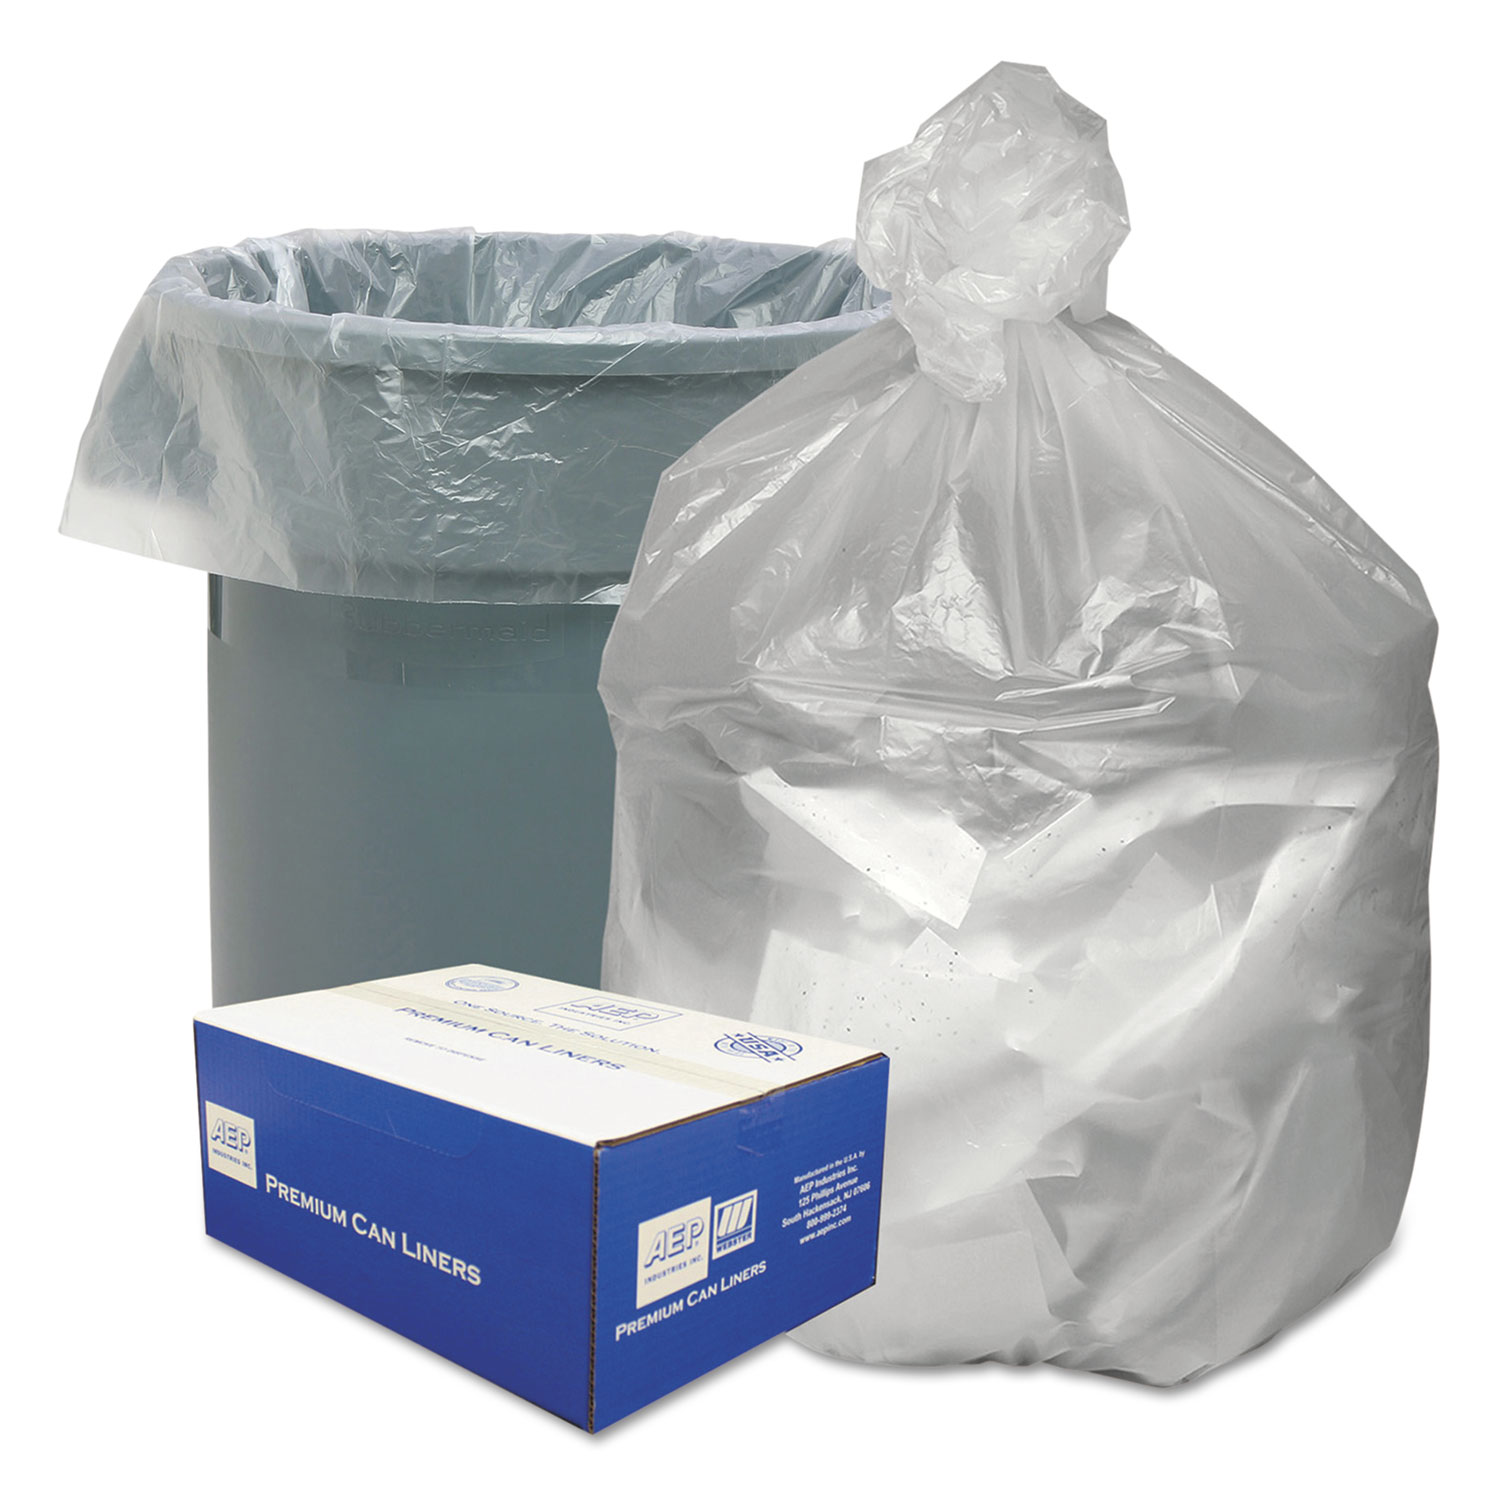  Good 'n Tuff GNT3340 Waste Can Liners, 33 gal, 9 microns, 33 x 39, Natural, 500/Carton (WBIGNT3340) 